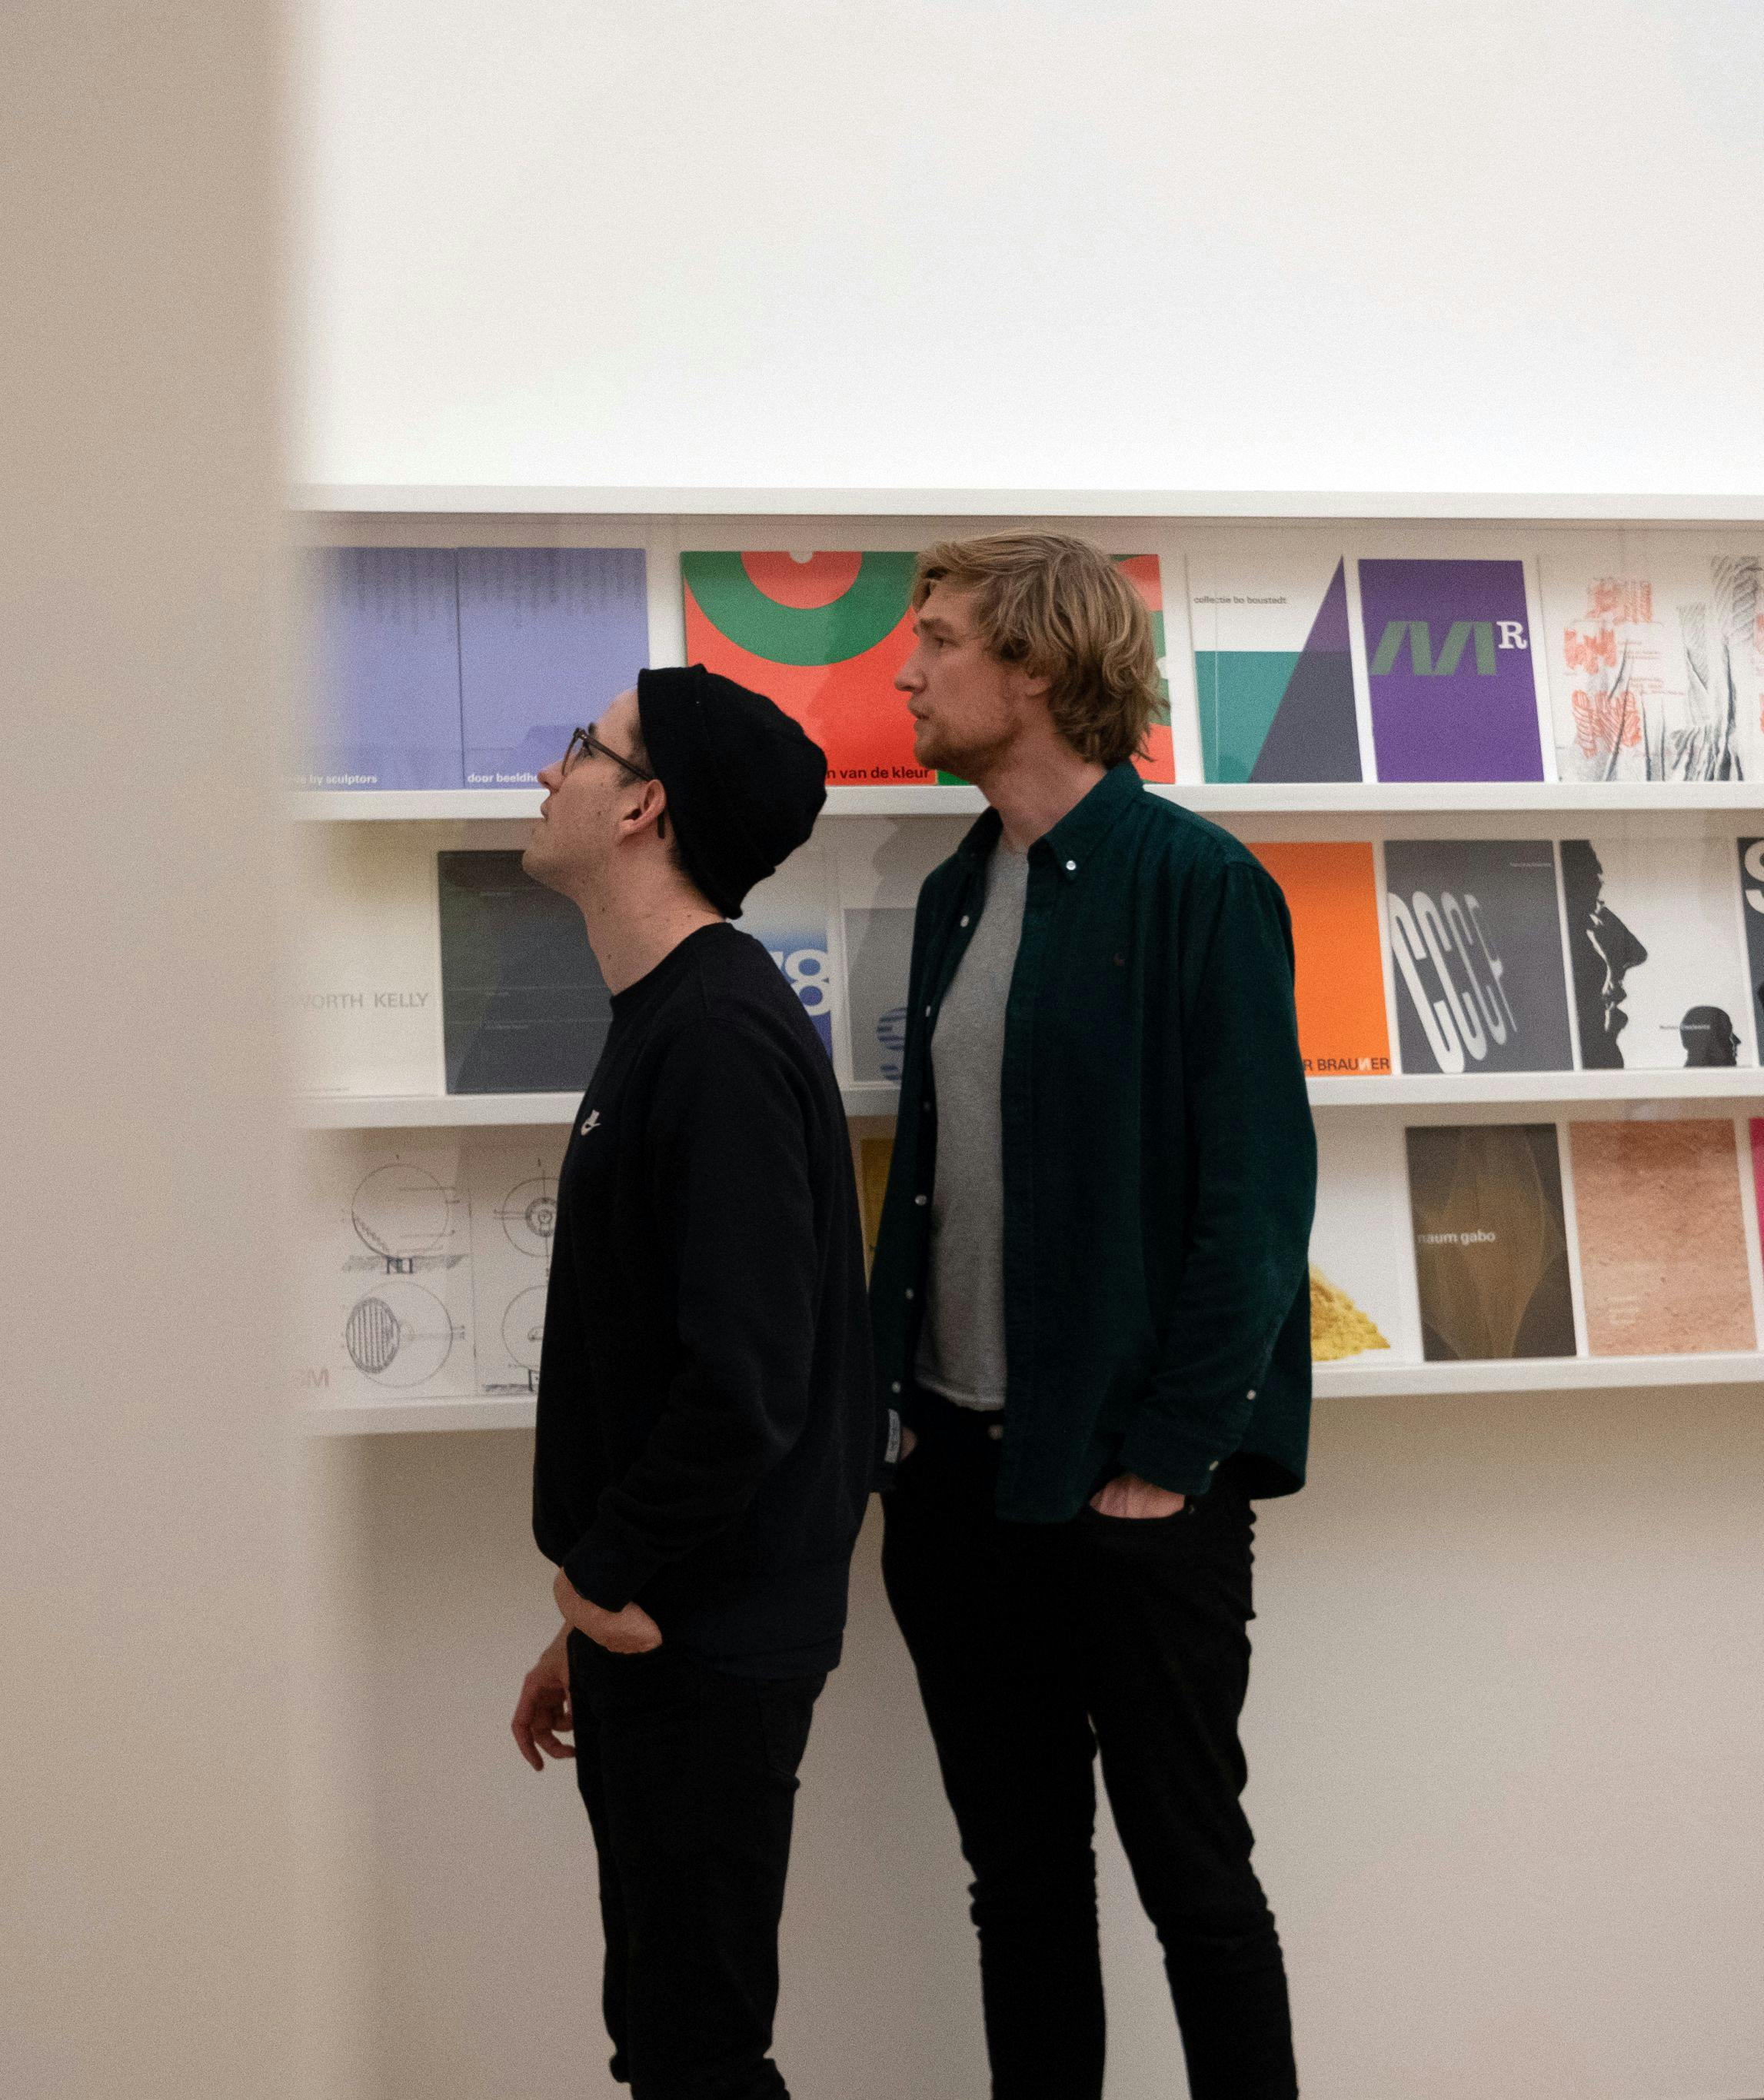 Two men standing in front of book shelves